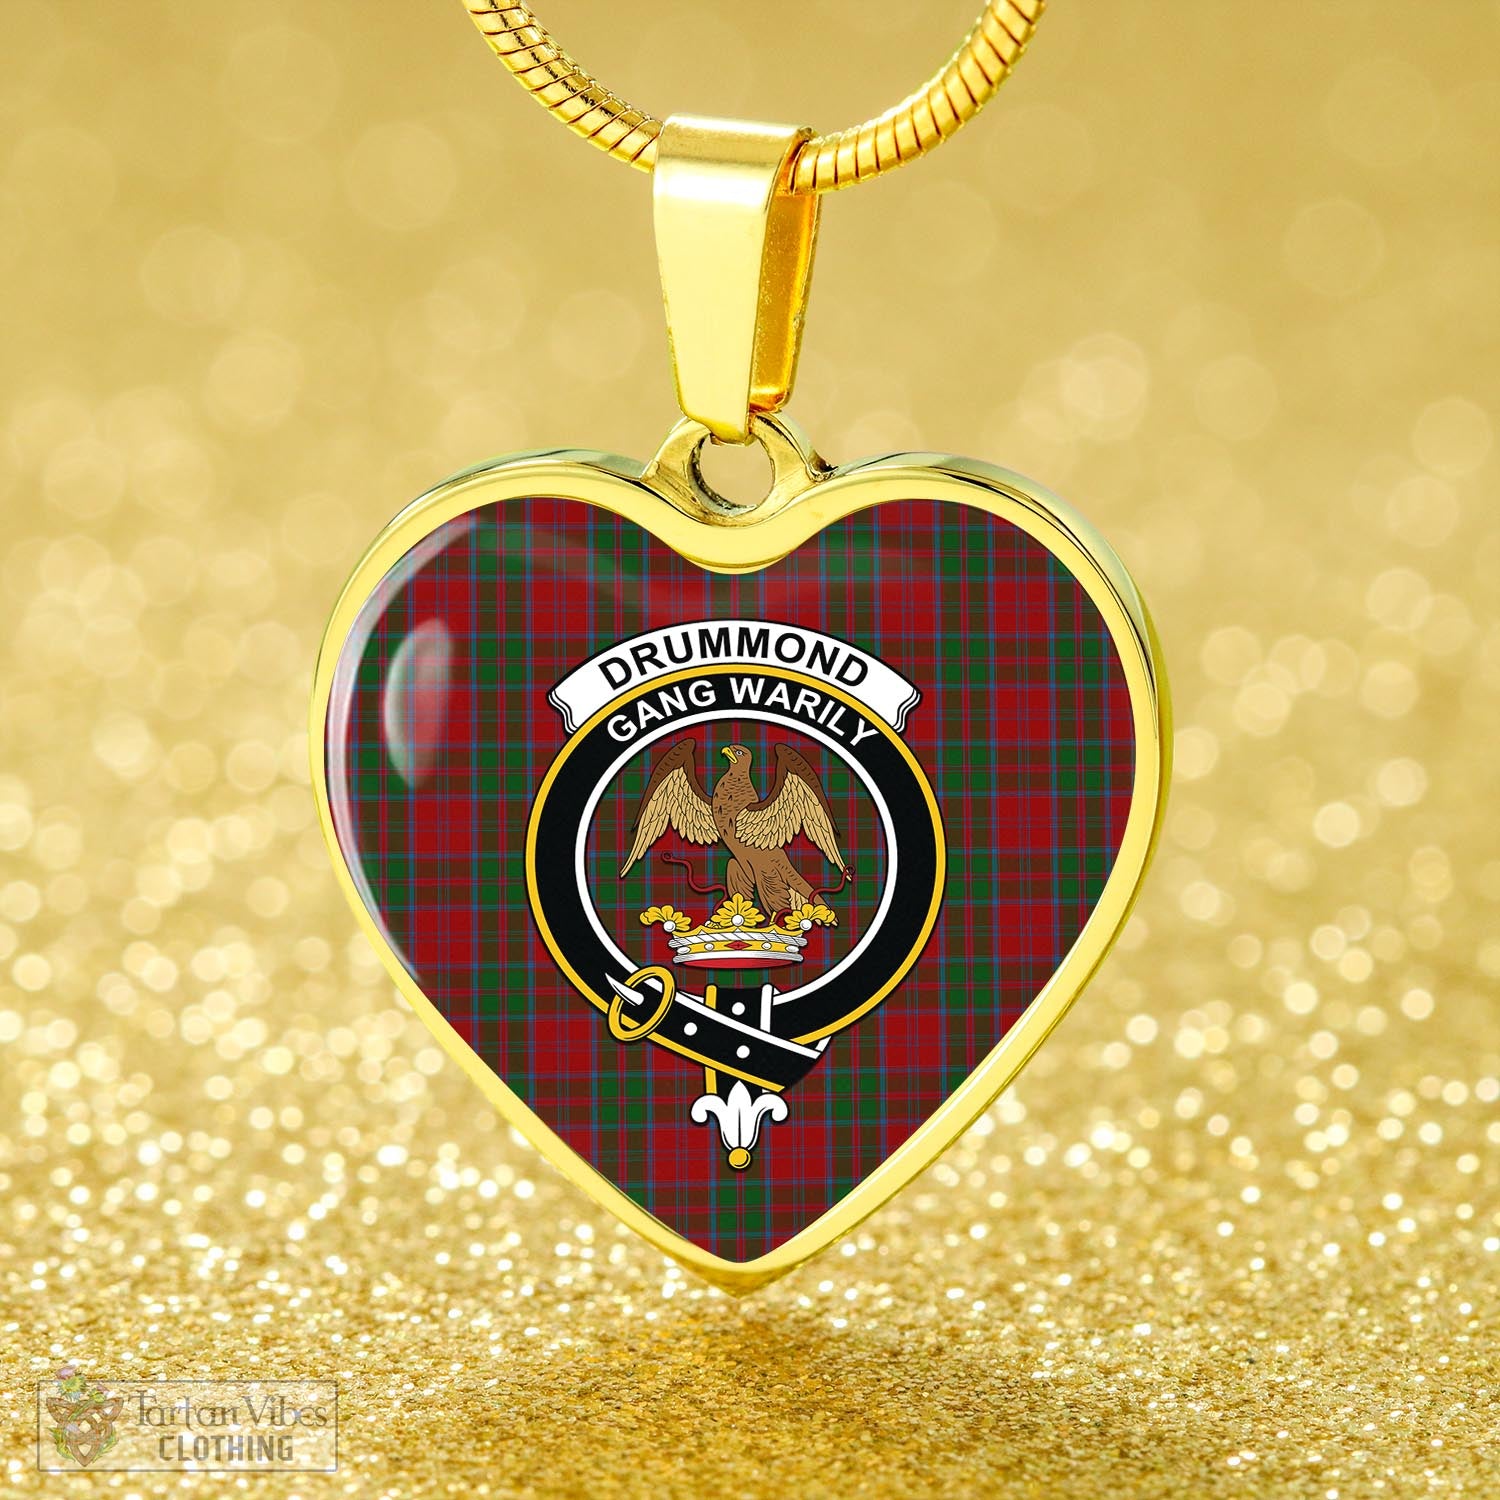 Tartan Vibes Clothing Drummond Tartan Heart Necklace with Family Crest